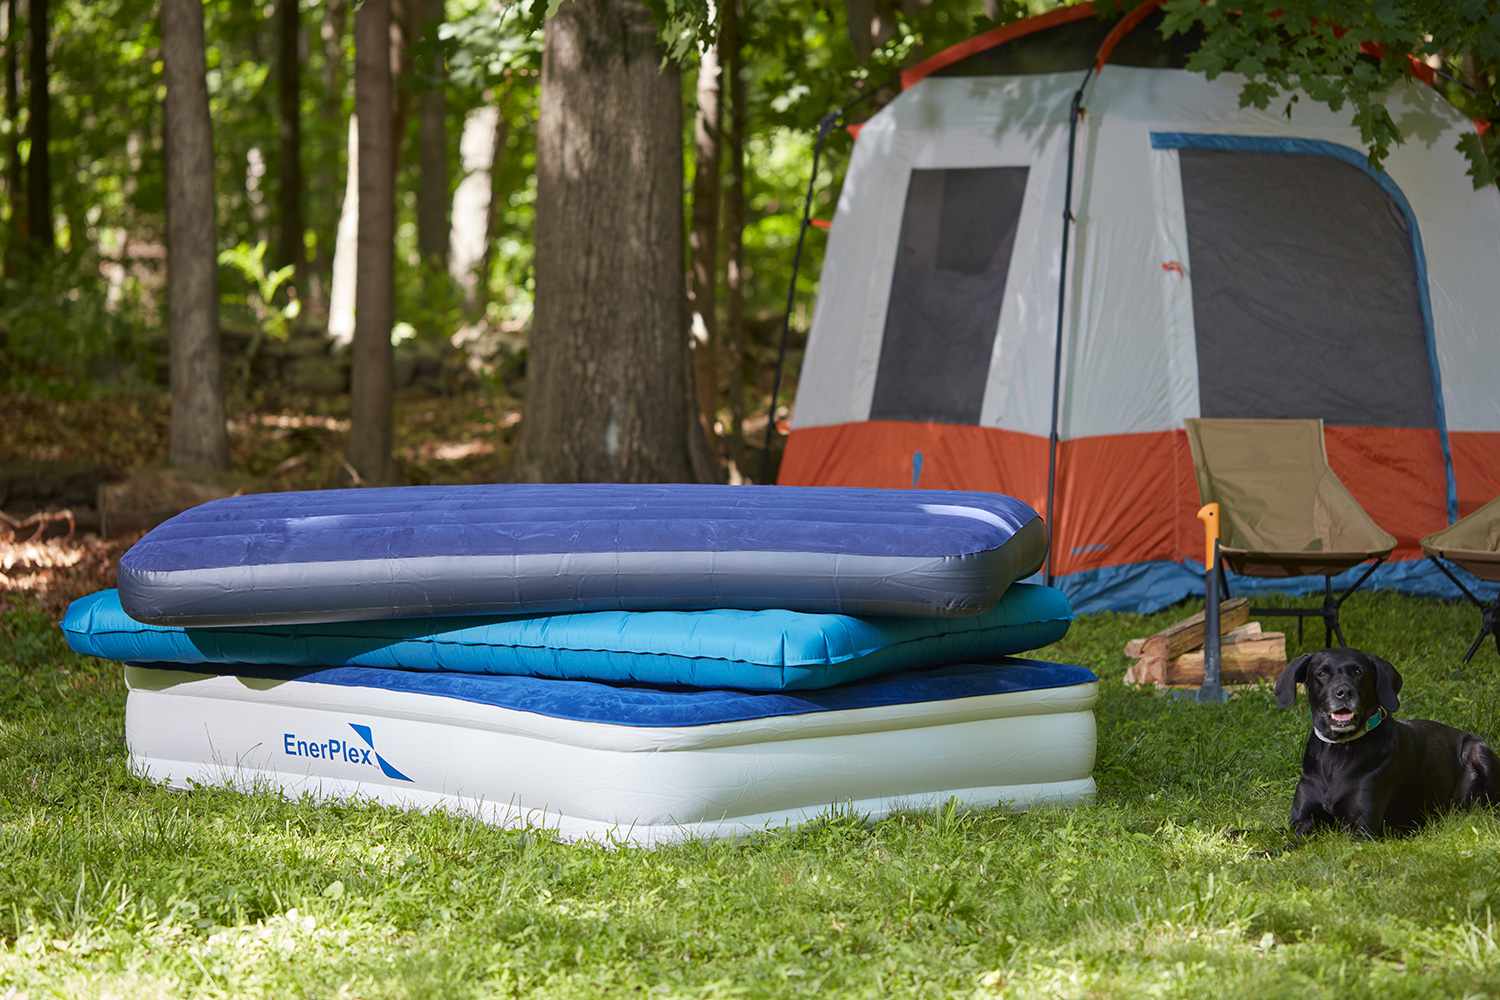 Which Side Of The Air Mattress Should Go Up?